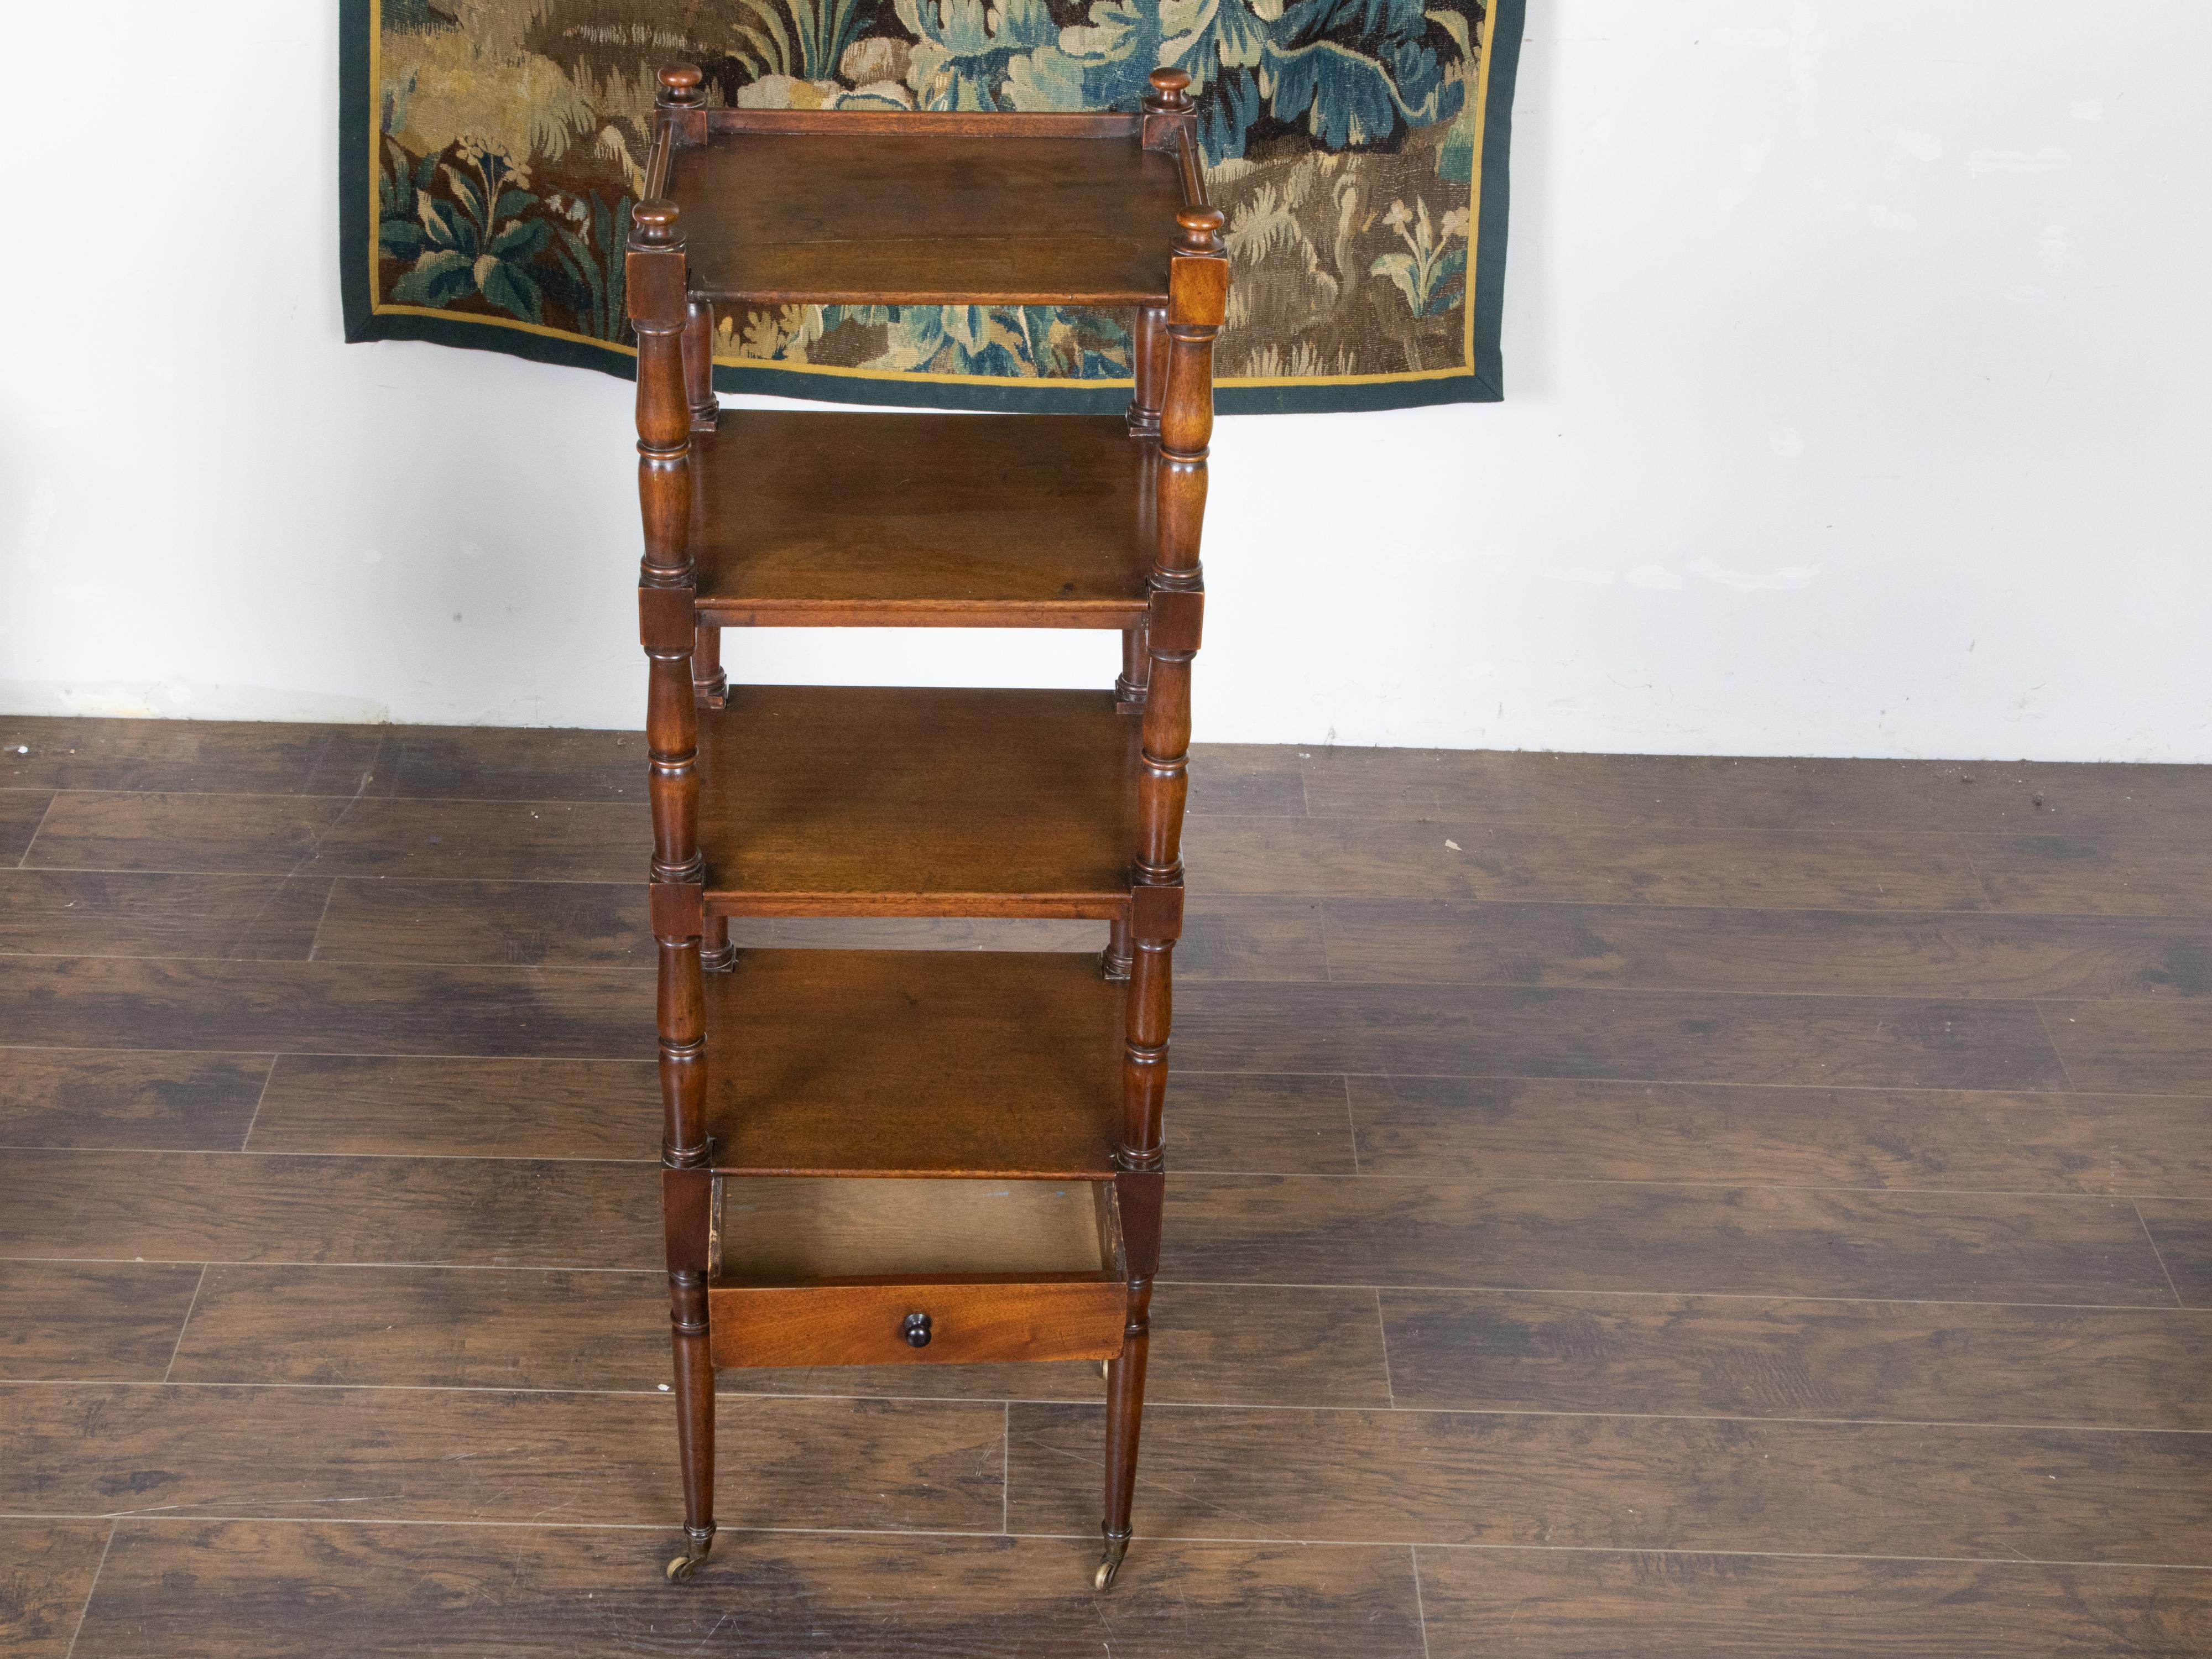 An English mahogany four-tiered trolley from the mid 19th century, with turned side posts, low drawer, finials and petite casters. Created in England during the second quarter of the 19th century, this mahogany trolley features four rectangular